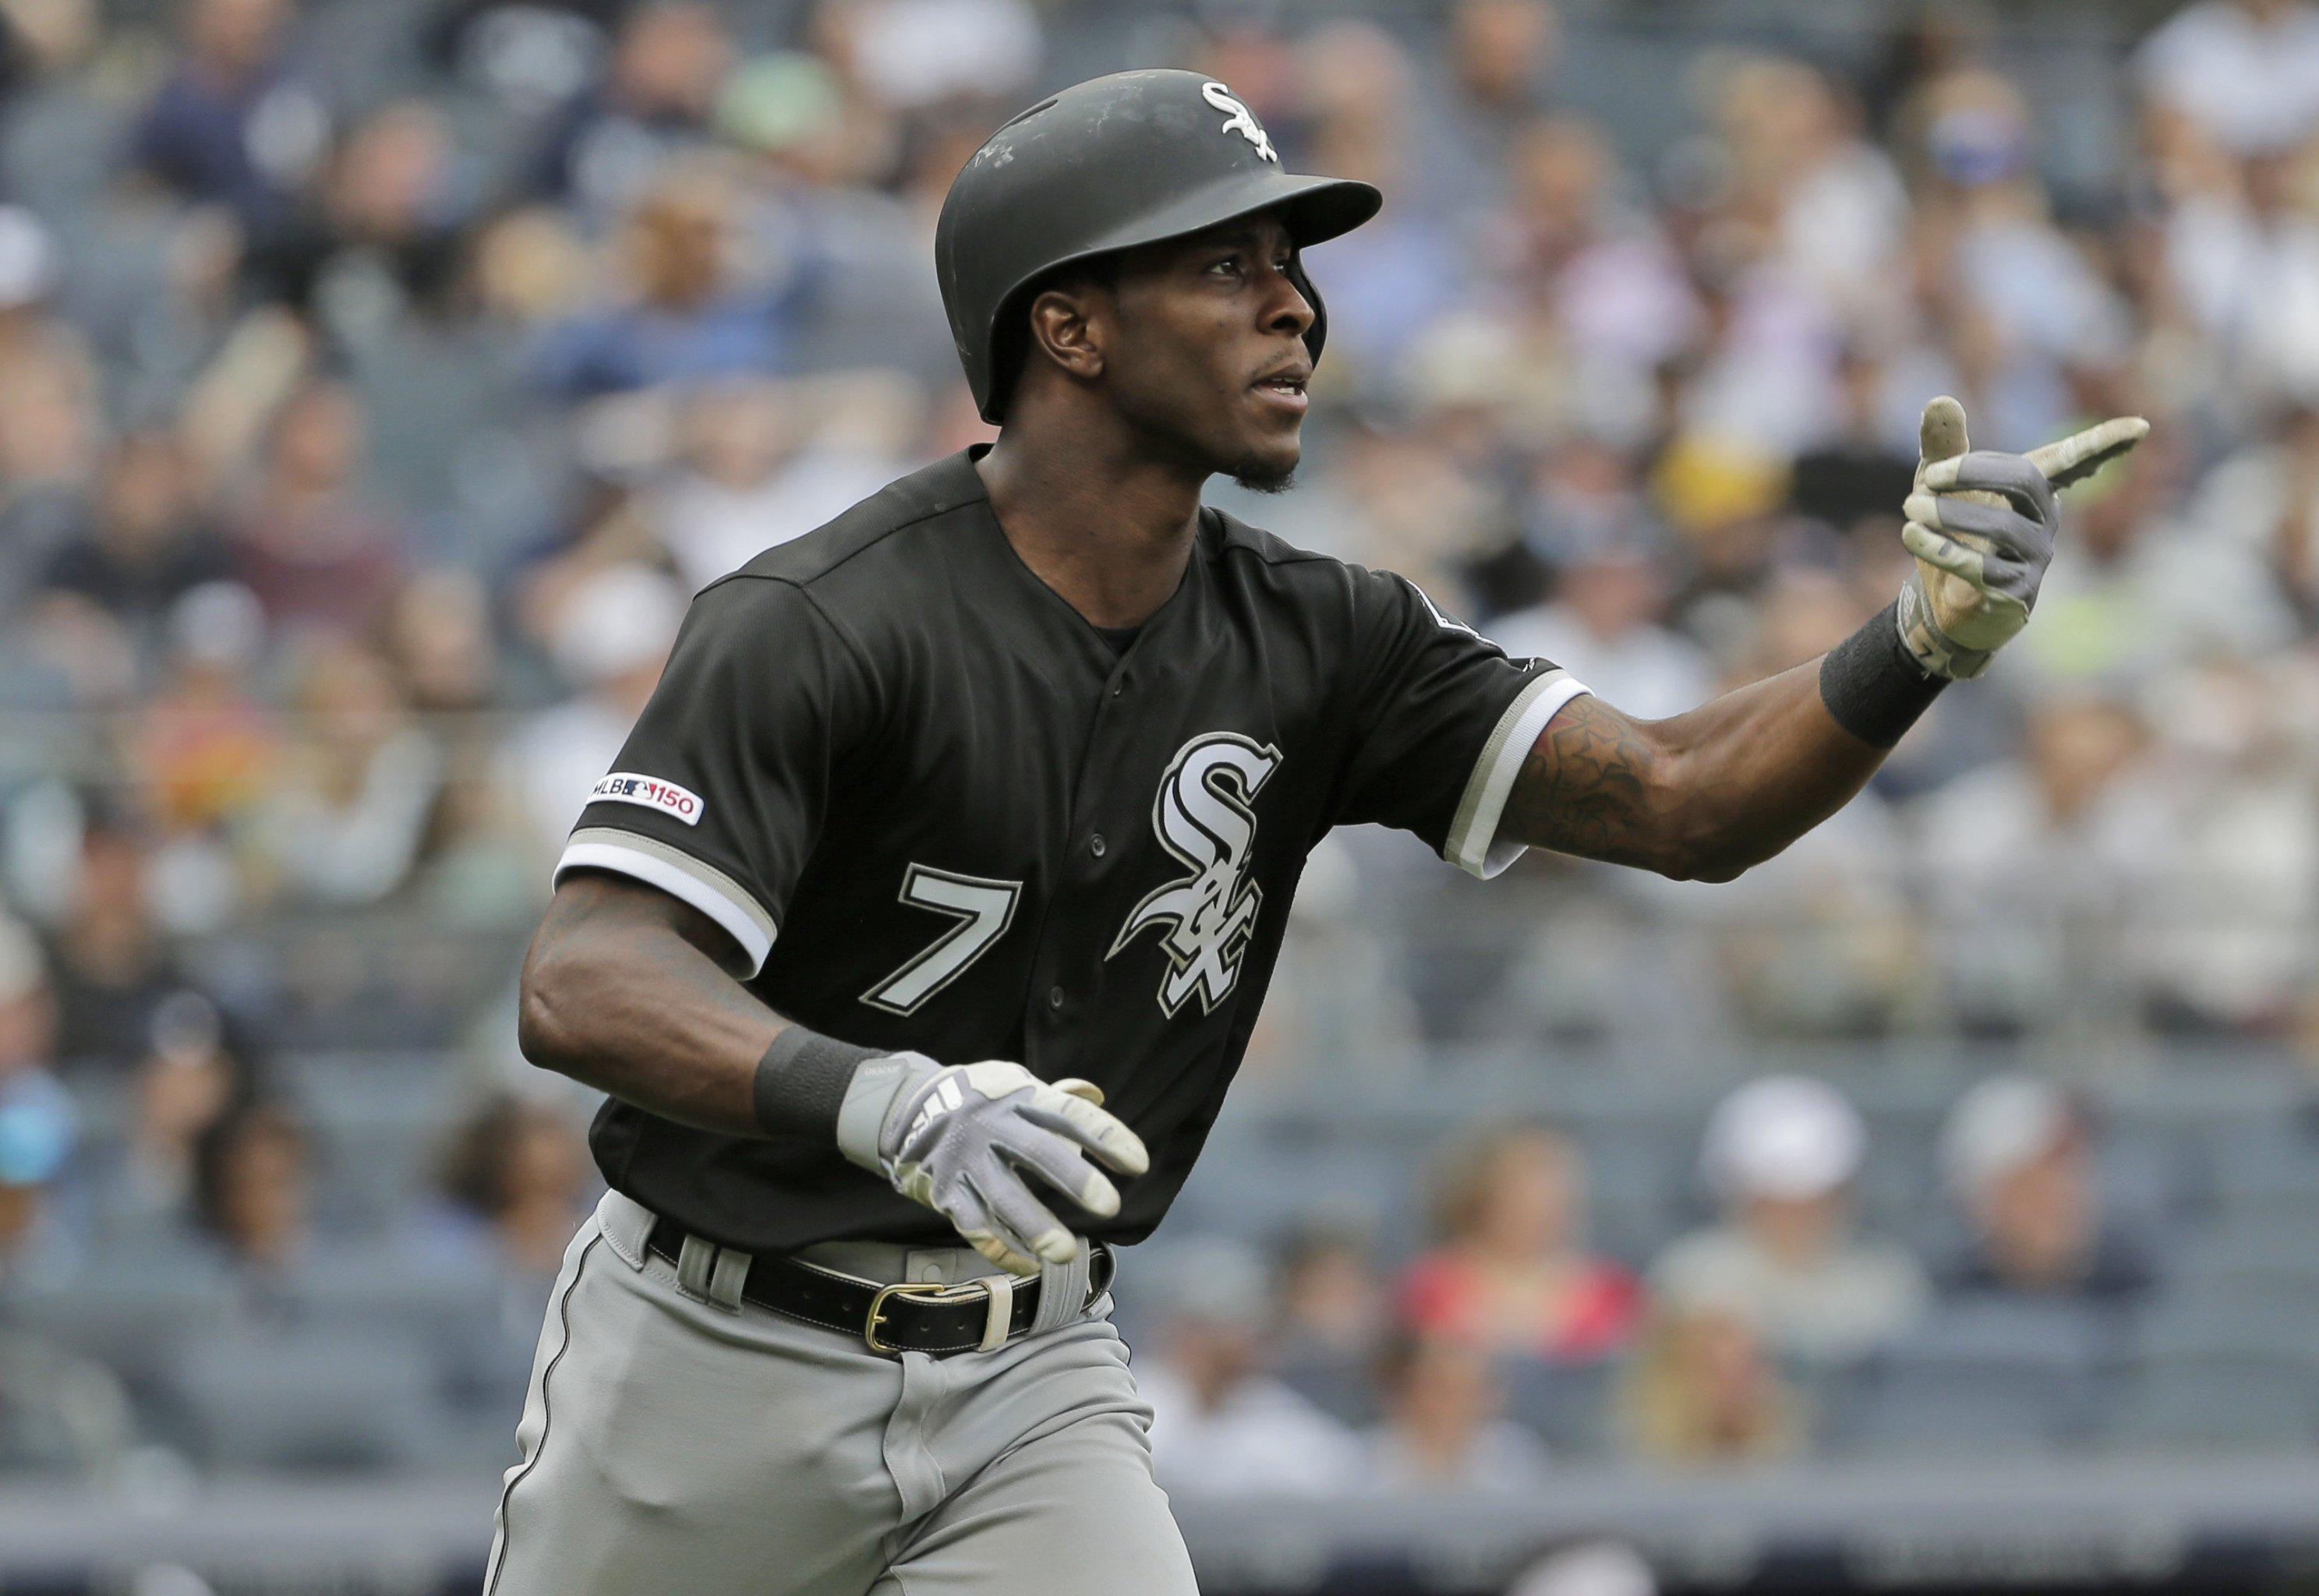 Tim Anderson Is Trying To Save Baseball From Itself, But Folks Won't Let Him